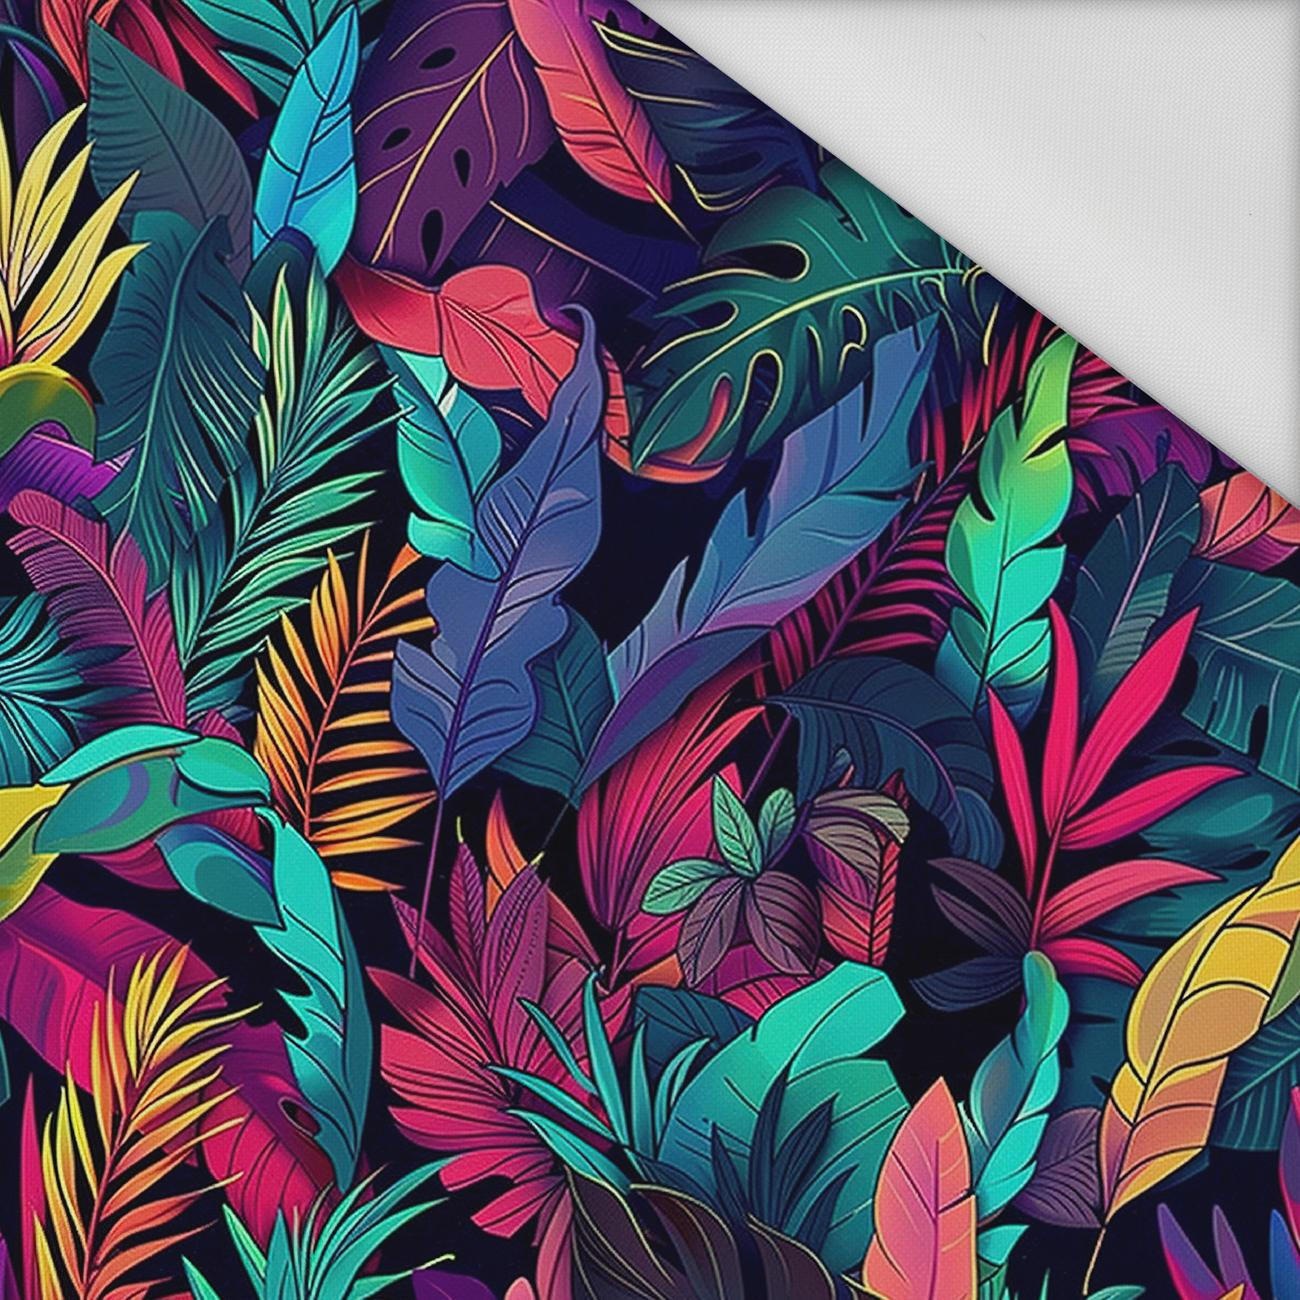 COLORFUL LEAVES - Waterproof woven fabric